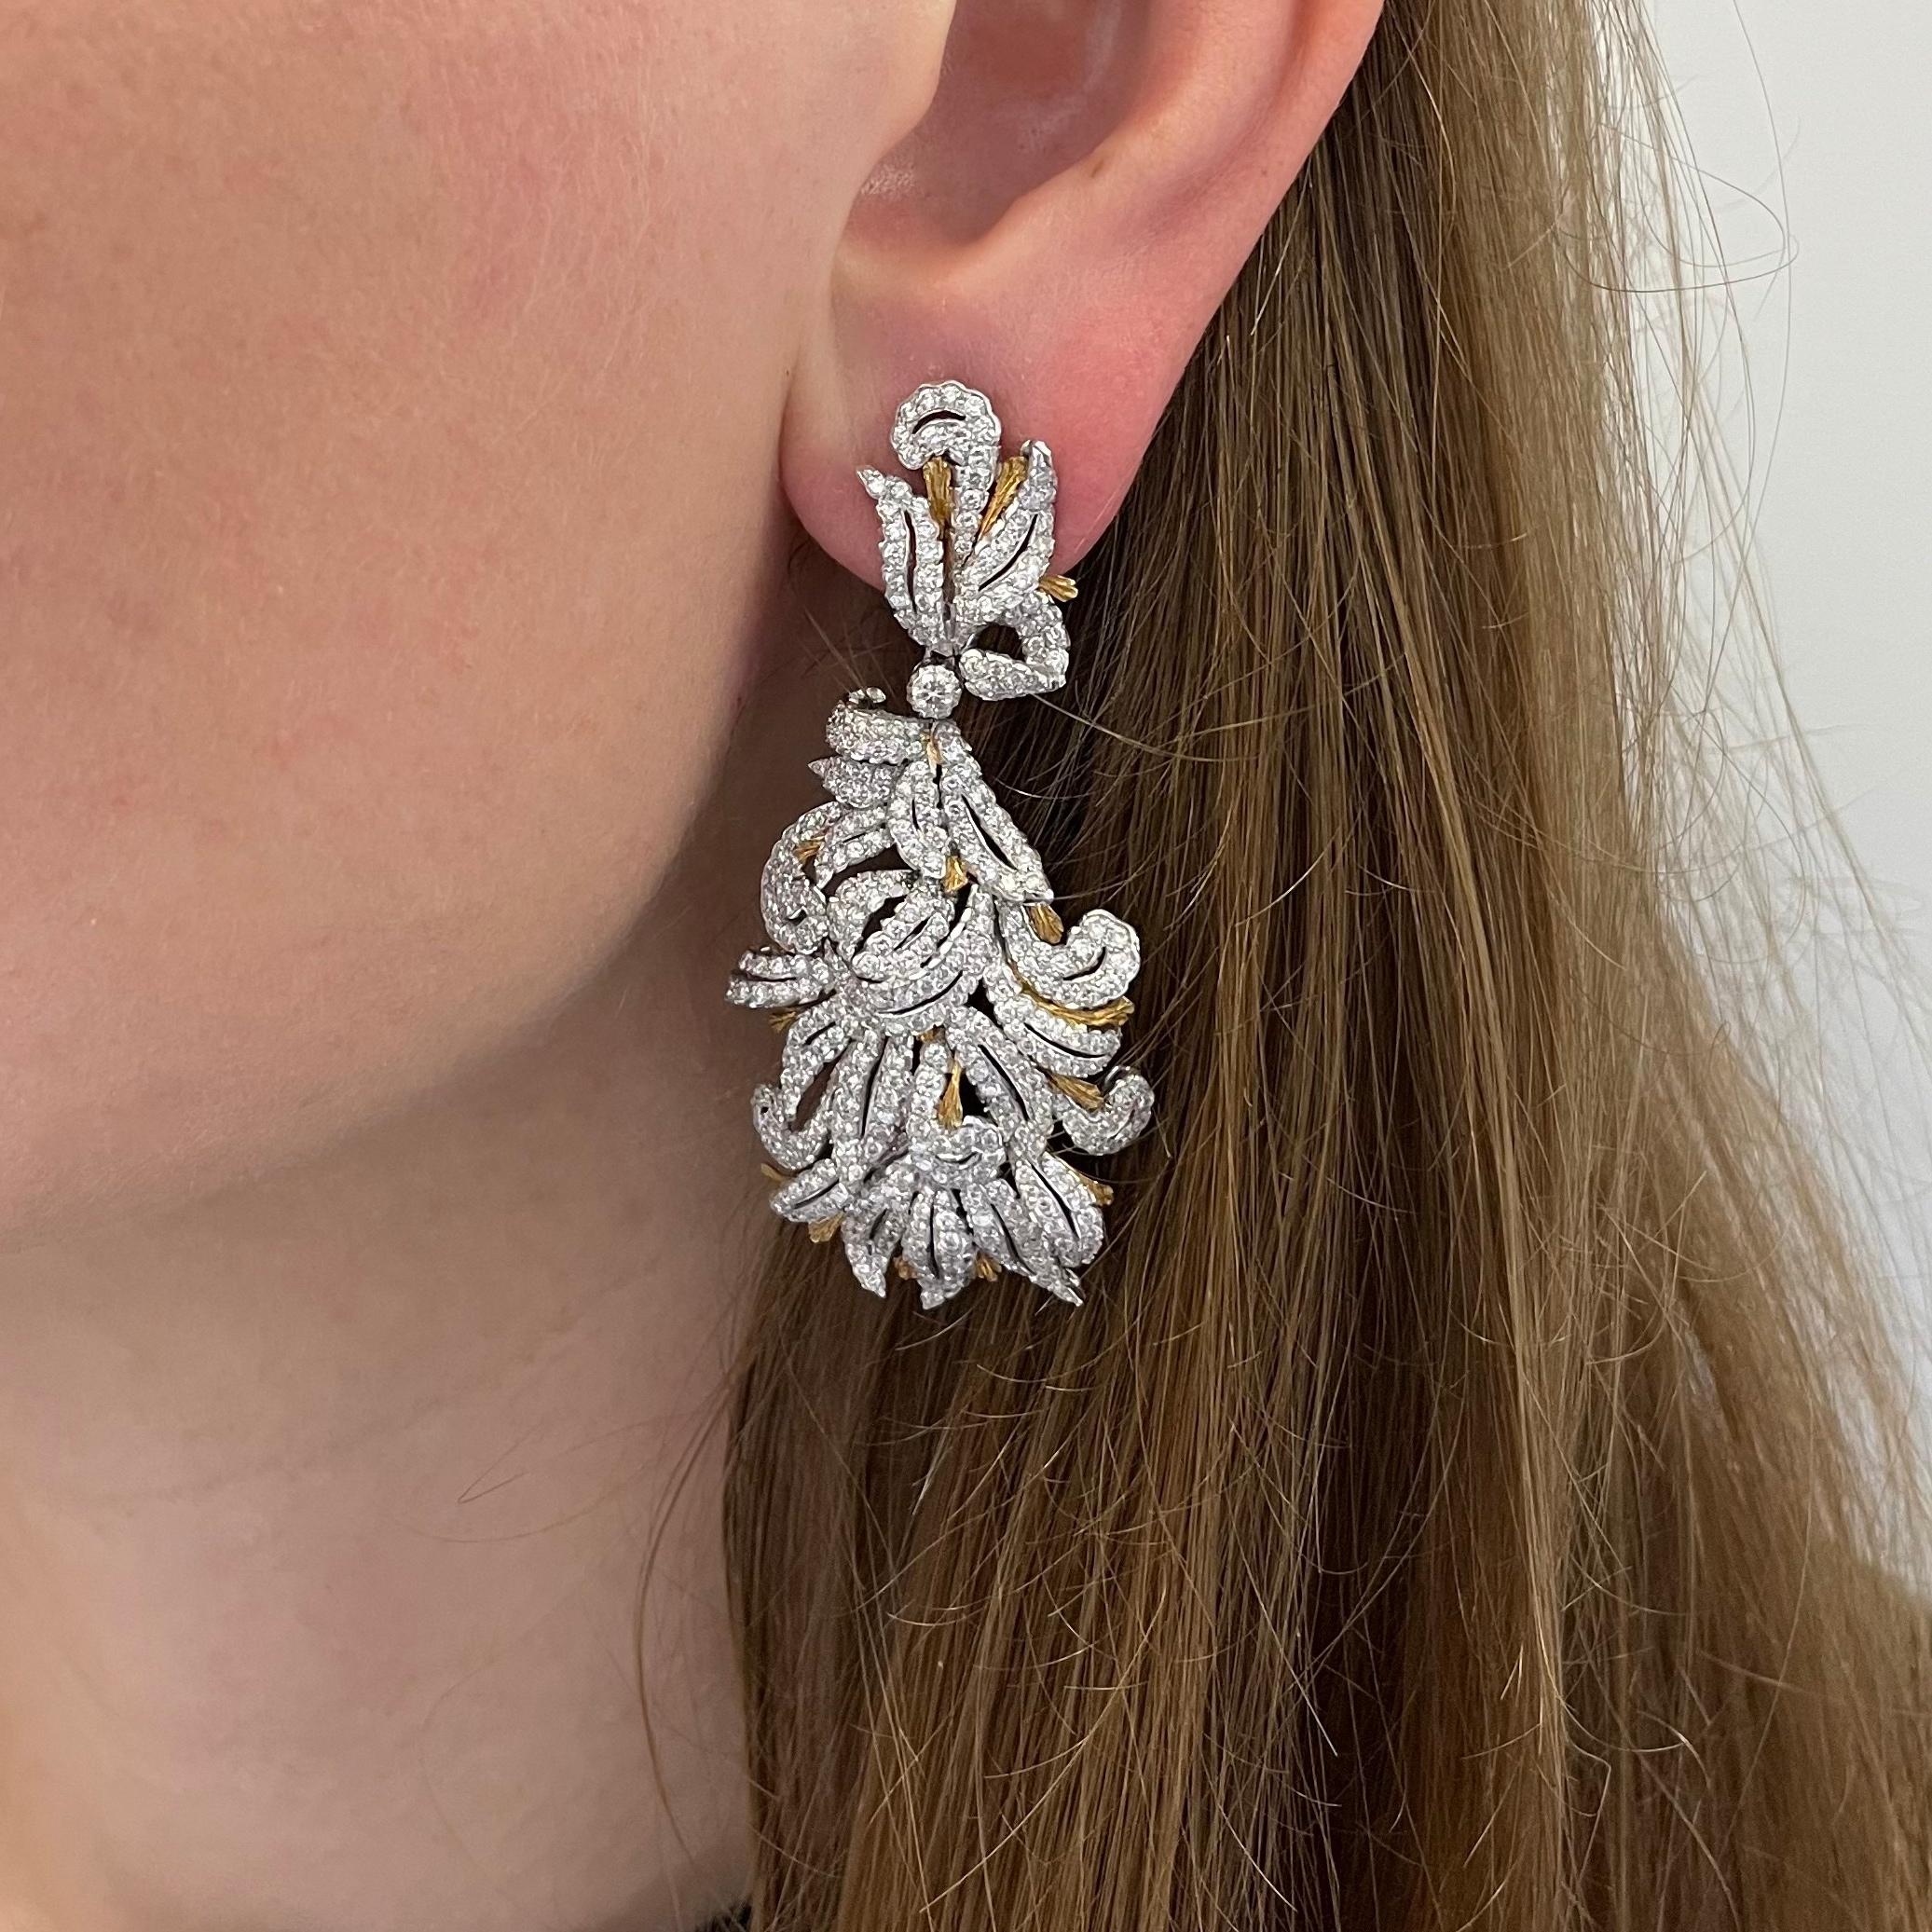 Buccellati Diamond Pendant Day/Night Earrings. This pair of earrings has a flowing floral motif with round diamond weighing of approximately 8 carats total all set in  gold accents. 
Earrings have omega backs and pendant drops are detachable for day